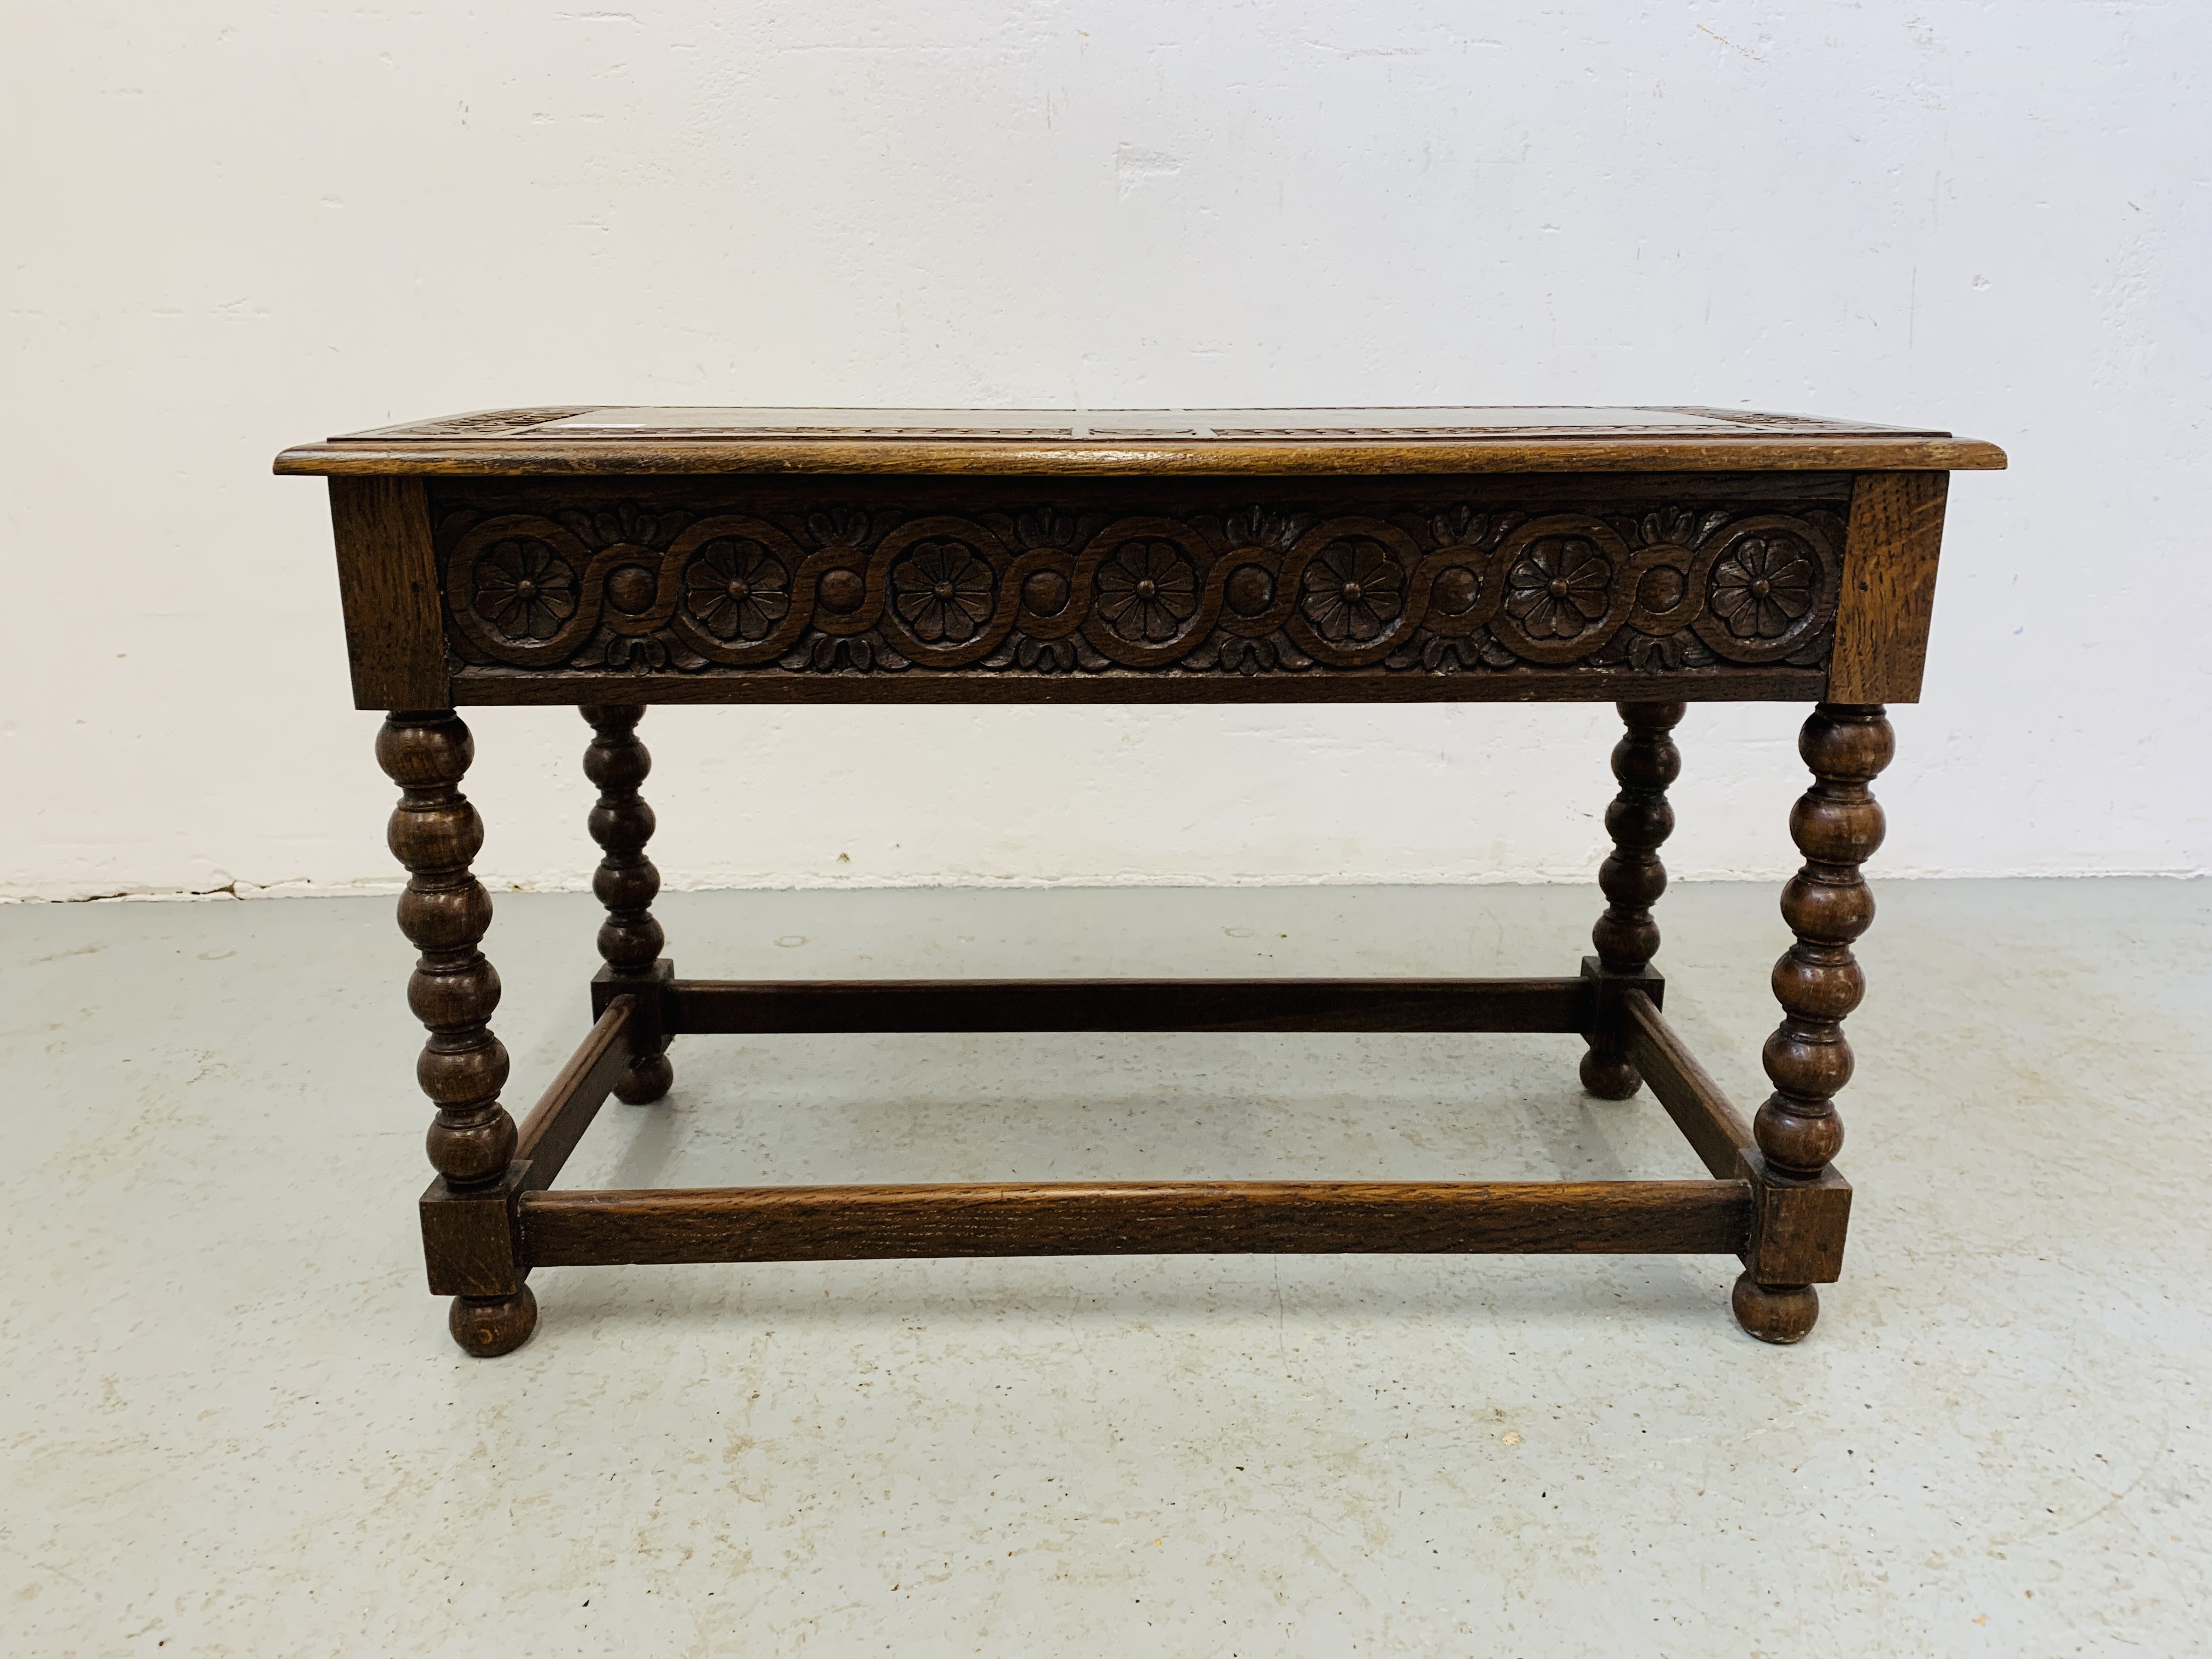 A HAND CARVED OAK SIDE TABLE WITH HINGED TOP AND BOBBIN DETAILED SUPPORTS - W 75CM. D 37CM. H 46CM. - Image 3 of 8